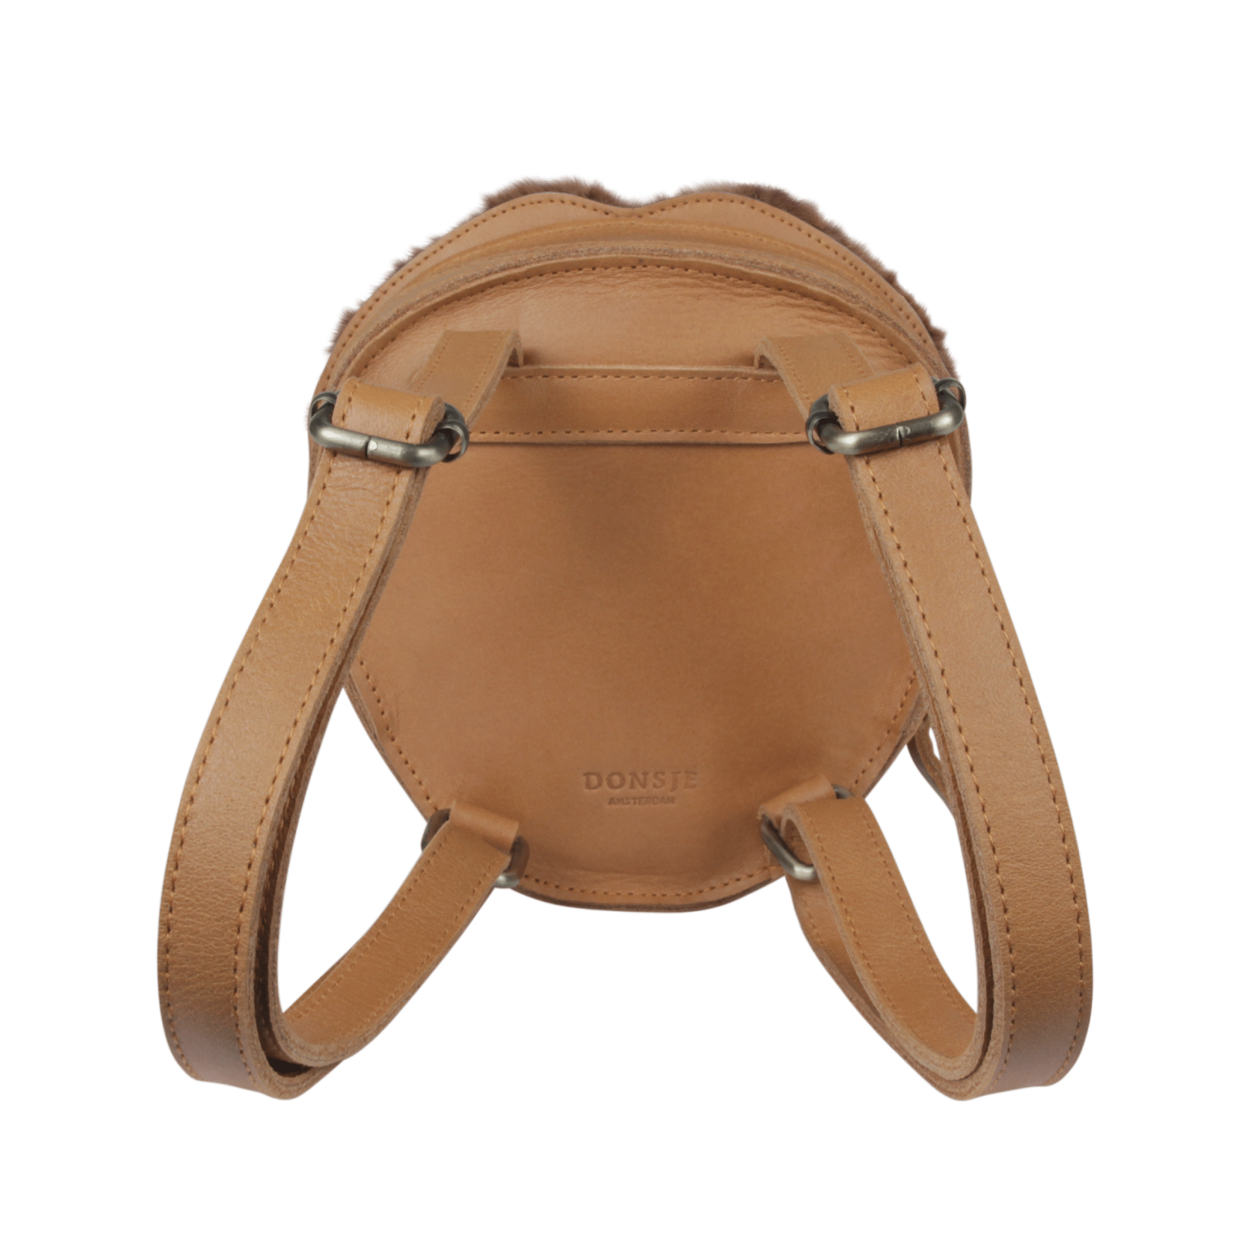 Kapi Exclusive Backpack | Leo | Camel Classic Leather